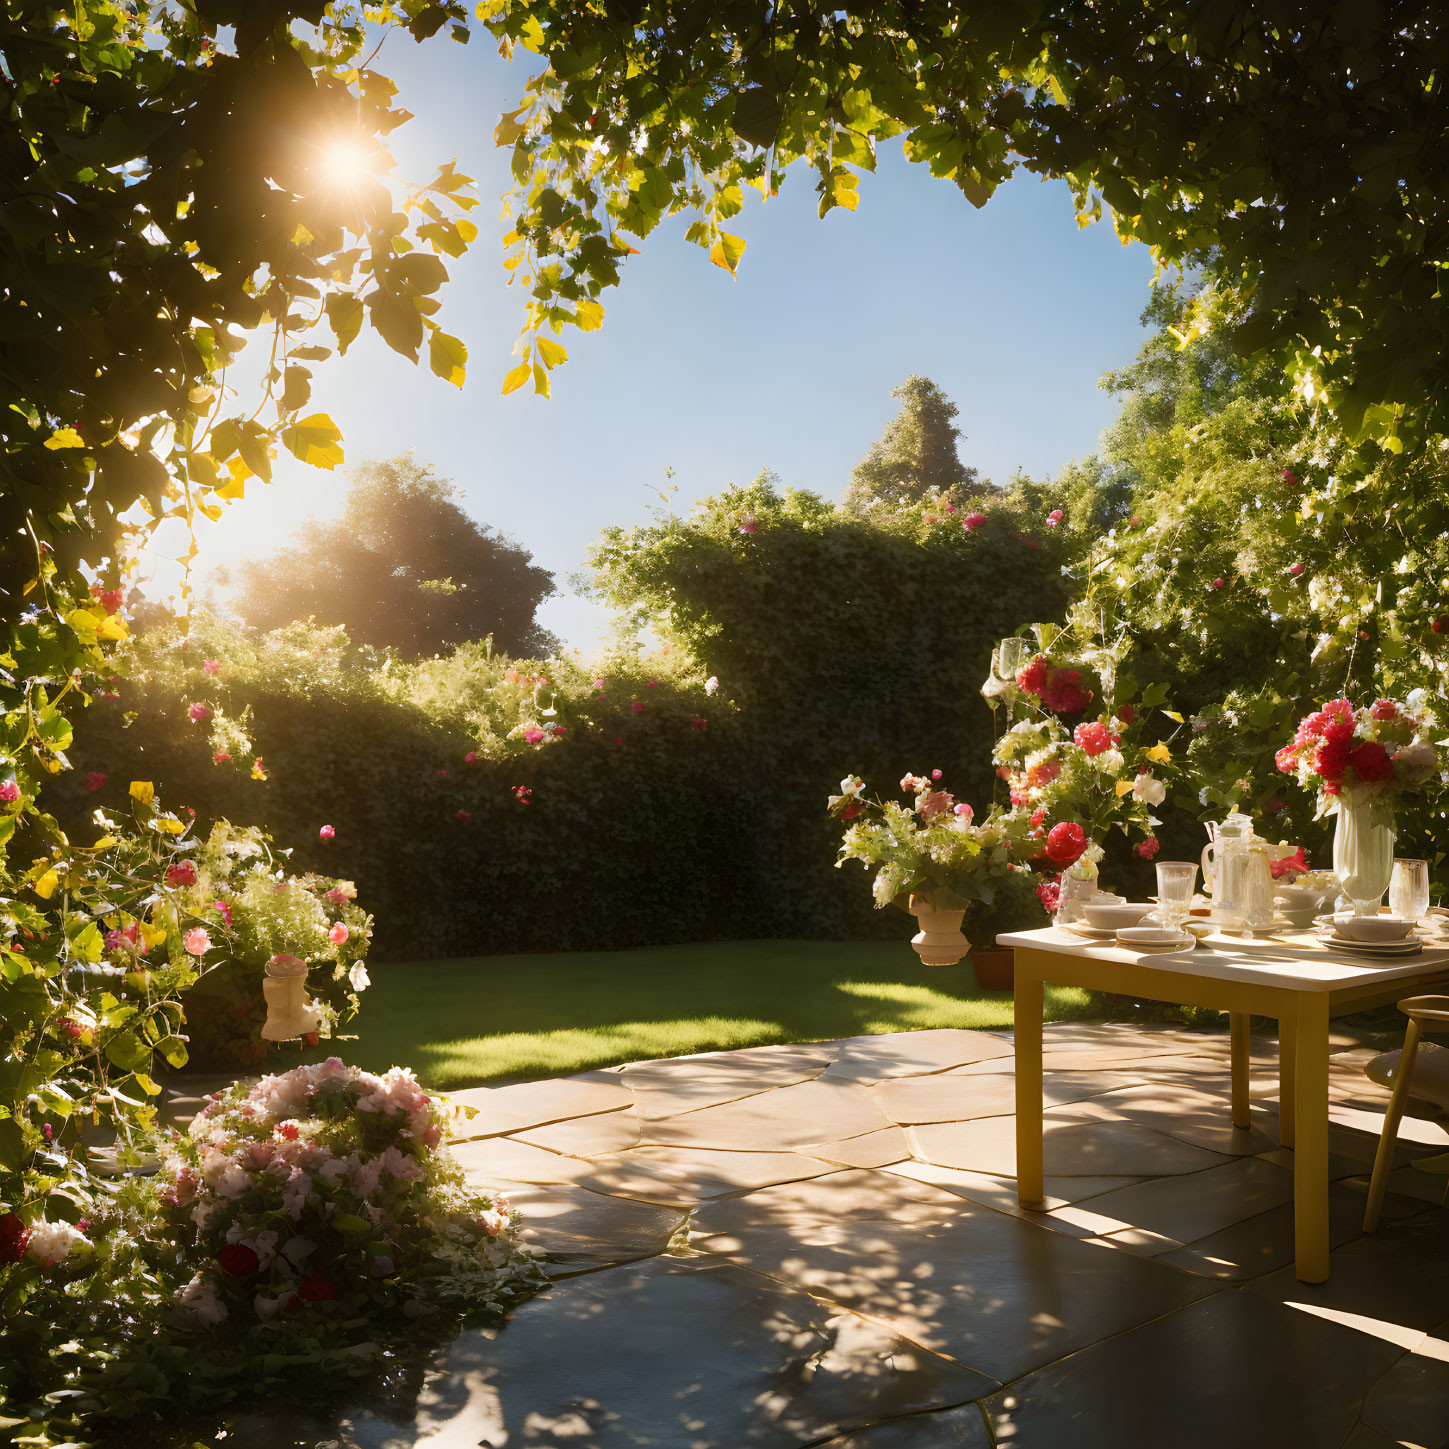 Serene garden scene with table set among flowers and greenery